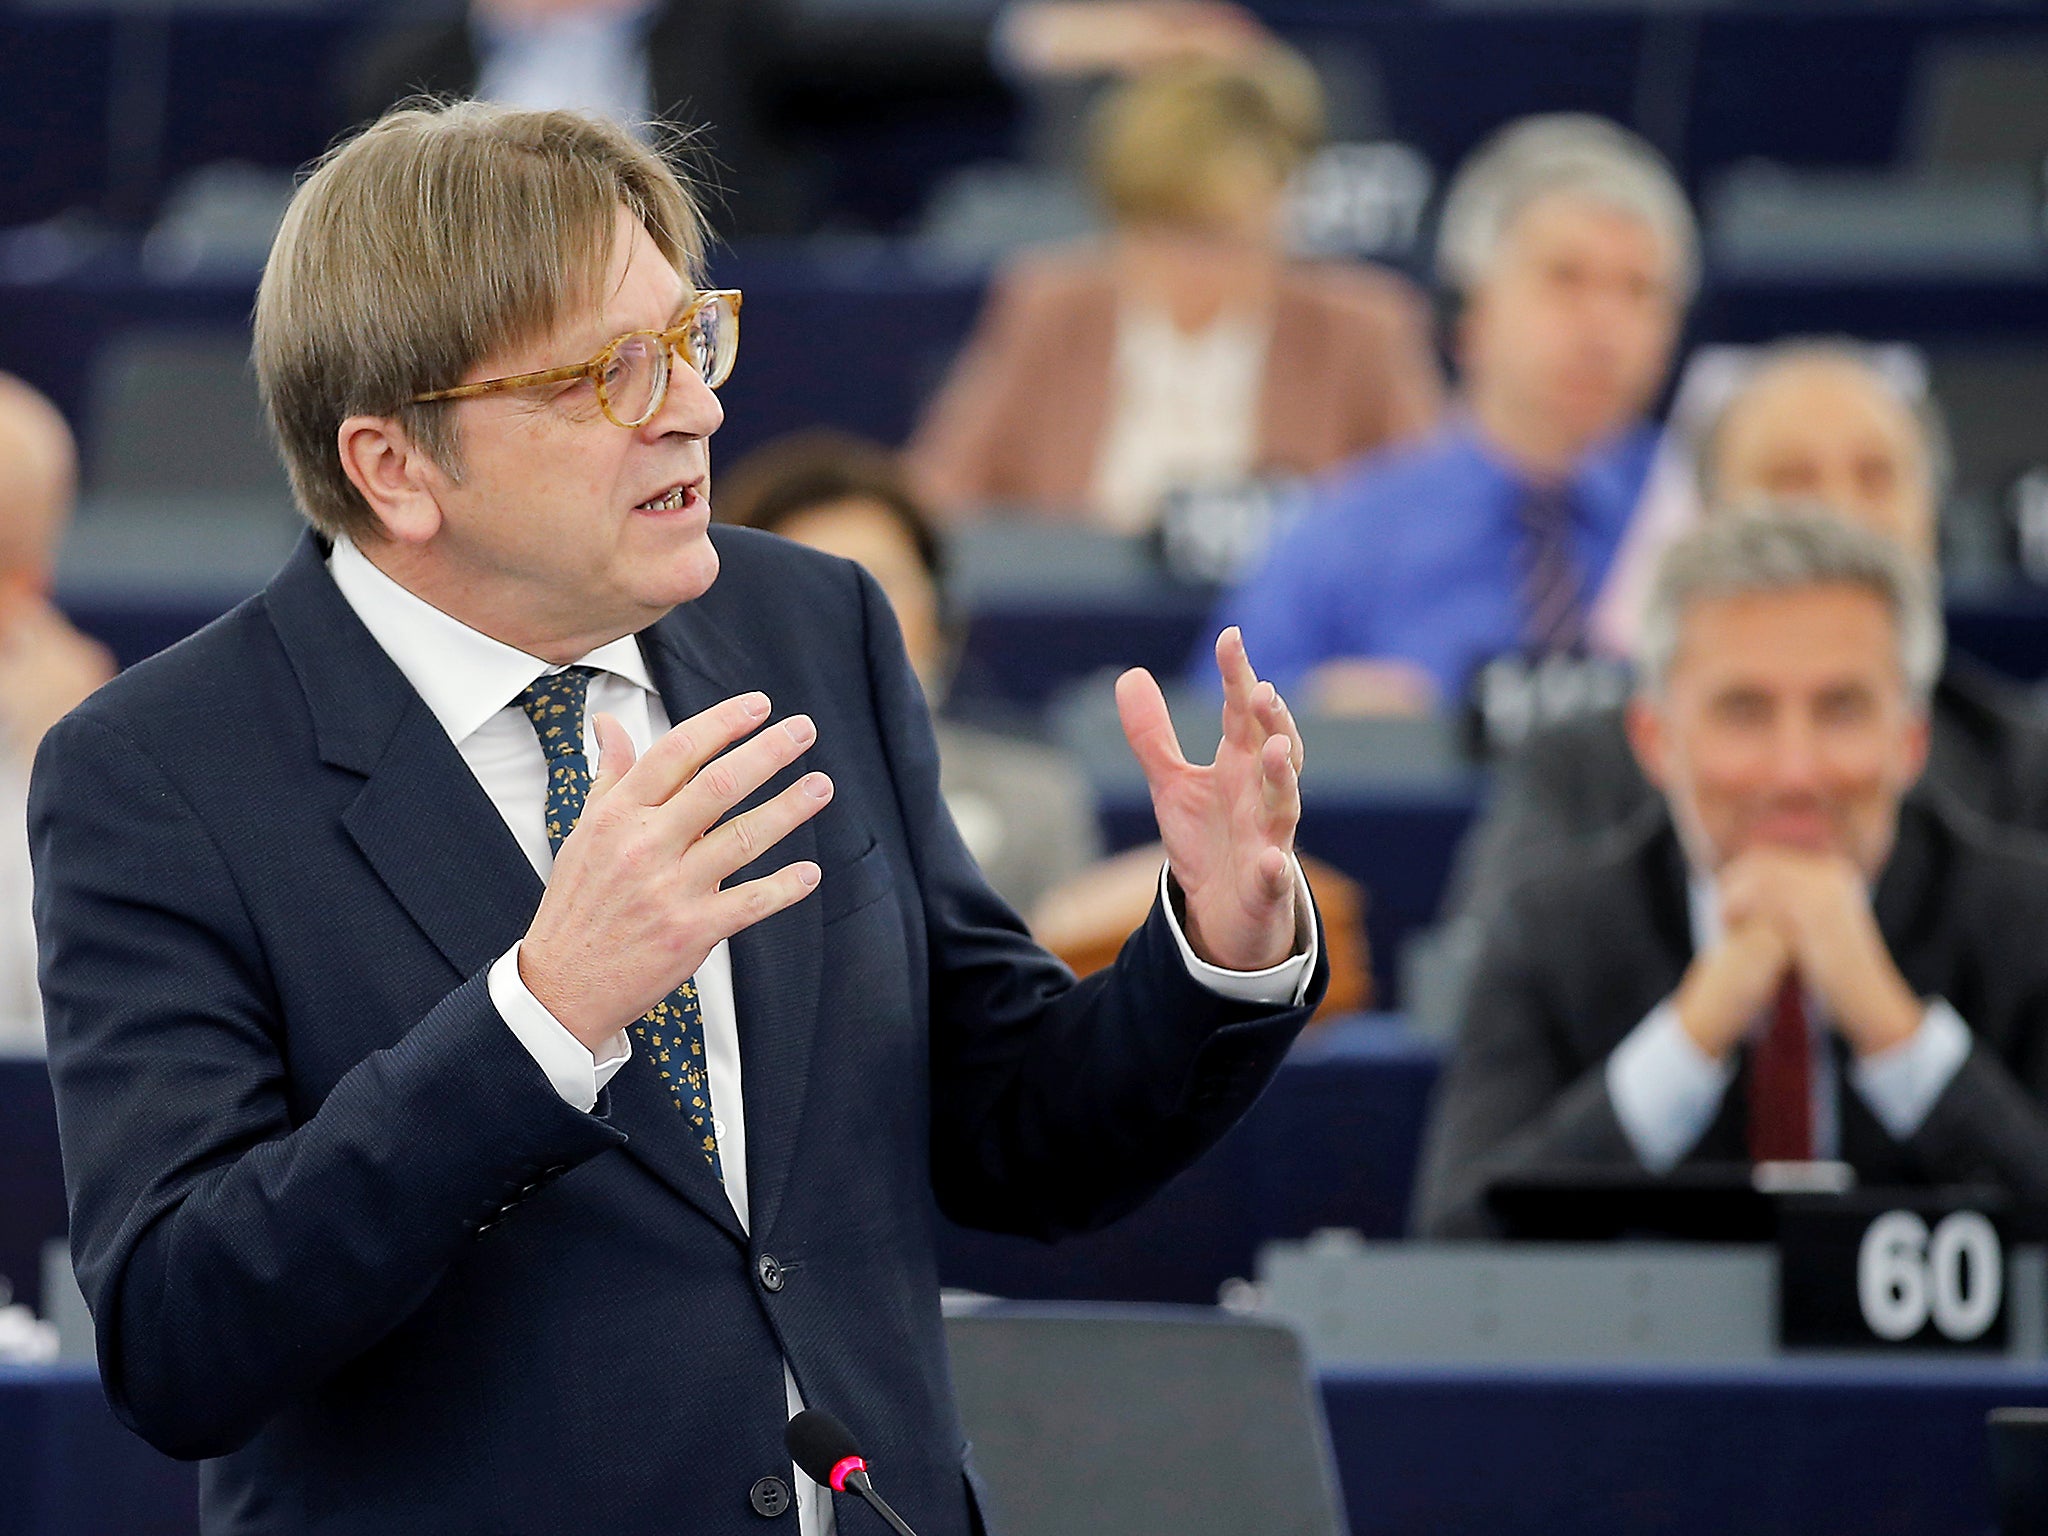 European Union's chief Brexit negotiator Guy Verhofstadt, who one Brussels source called "a pain in the arse"